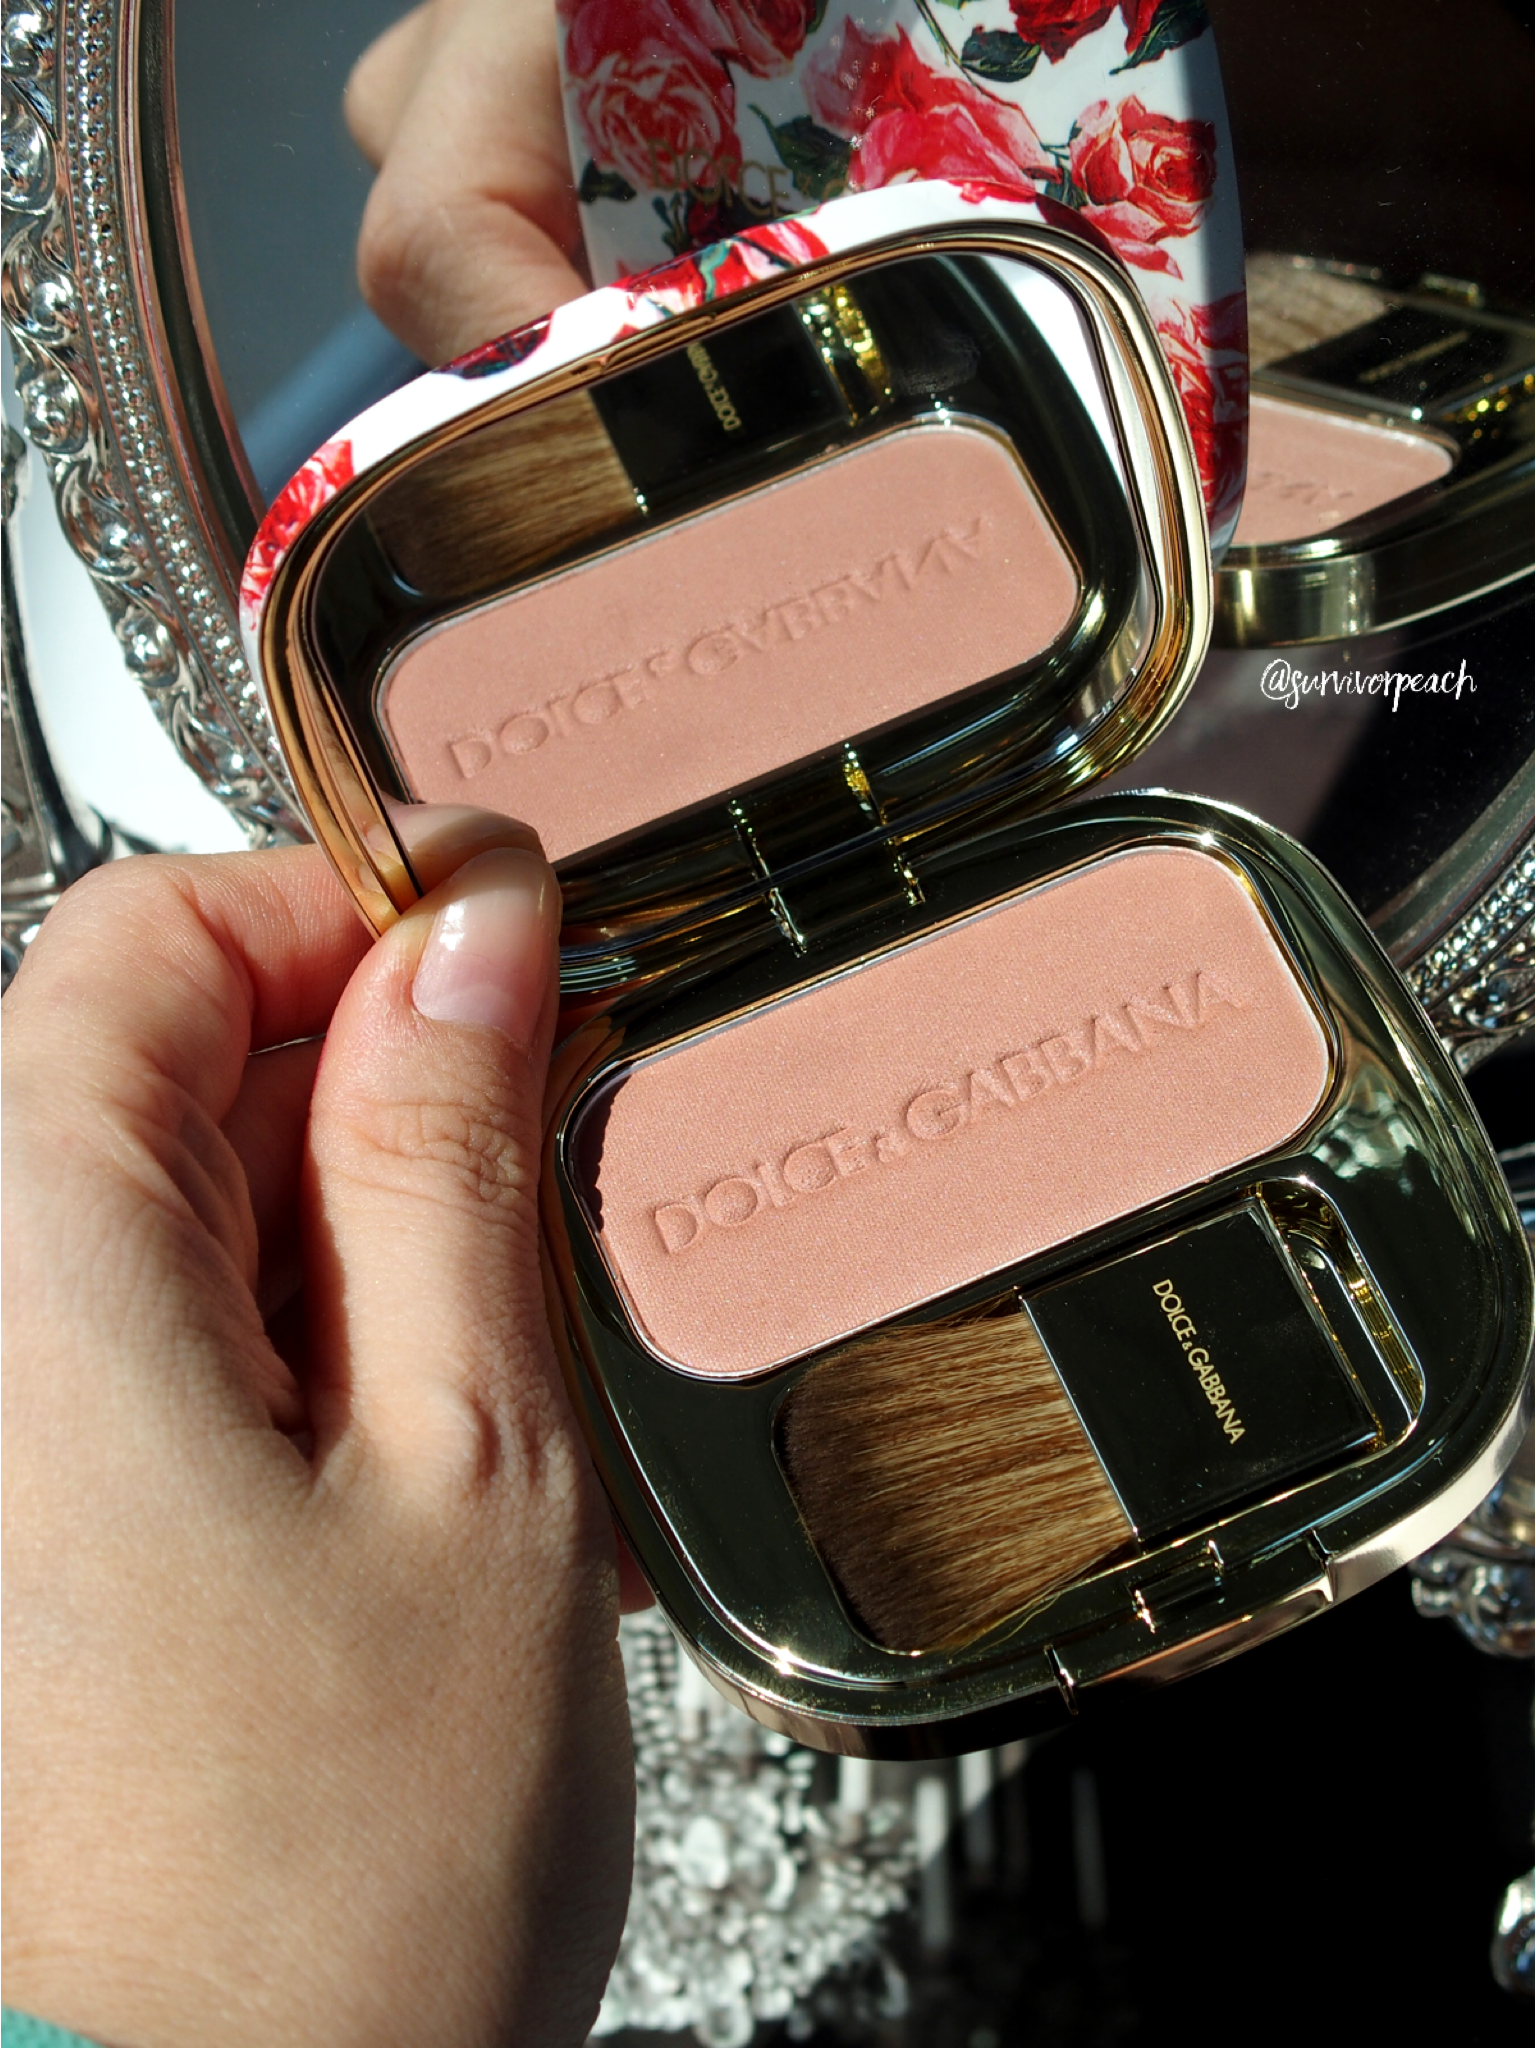 dolce and gabbana blush of roses